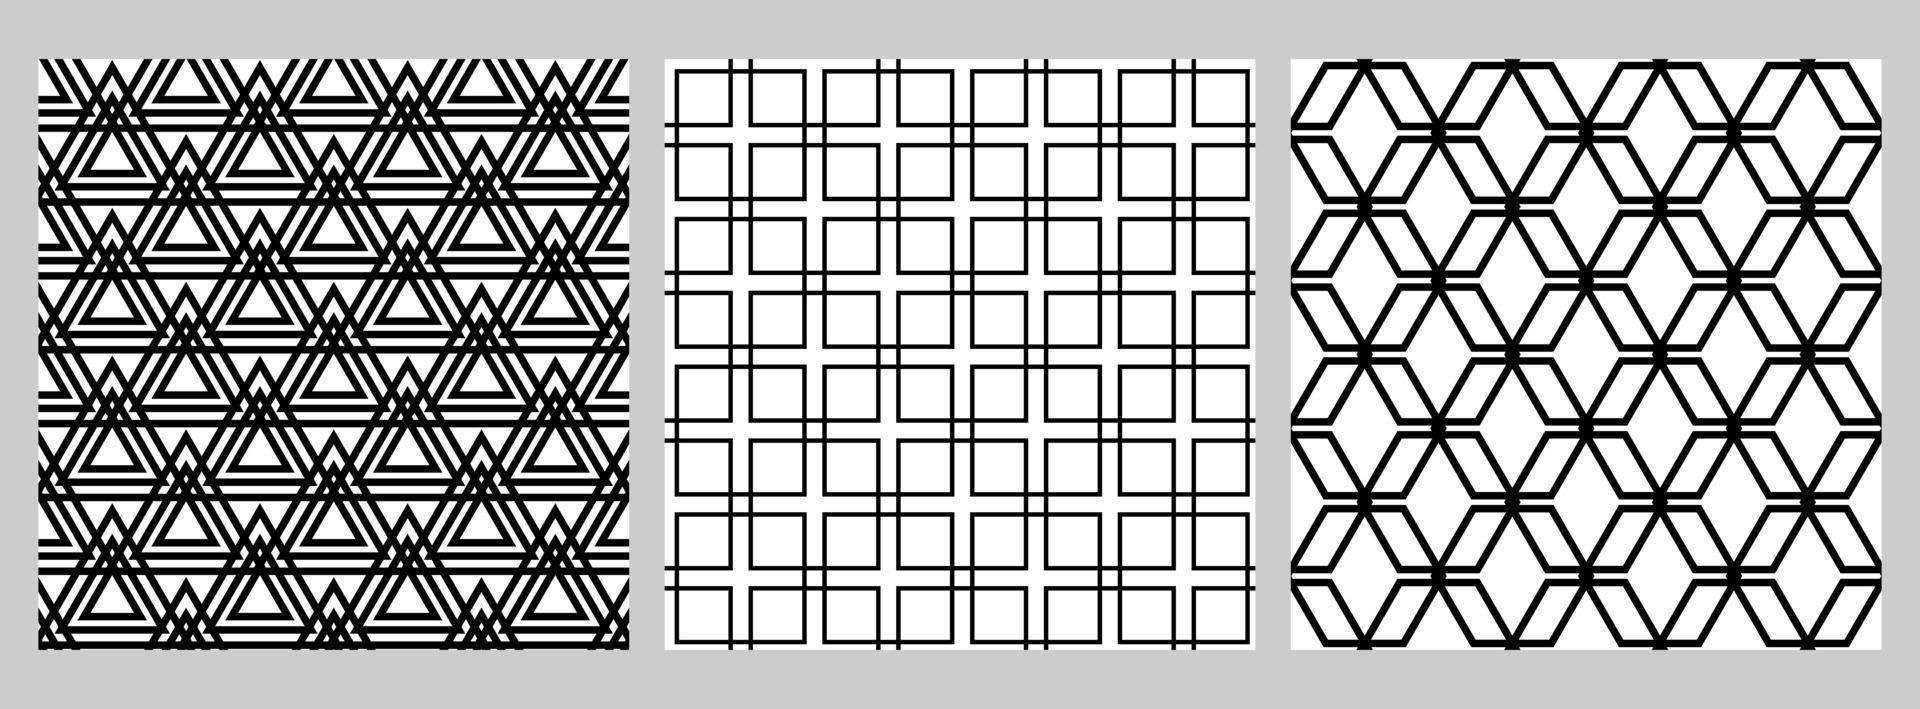 Set of geometric seamless pattern with figures arranged in a grid. Black shapes on white background. Square, rhombus, triangle. vector